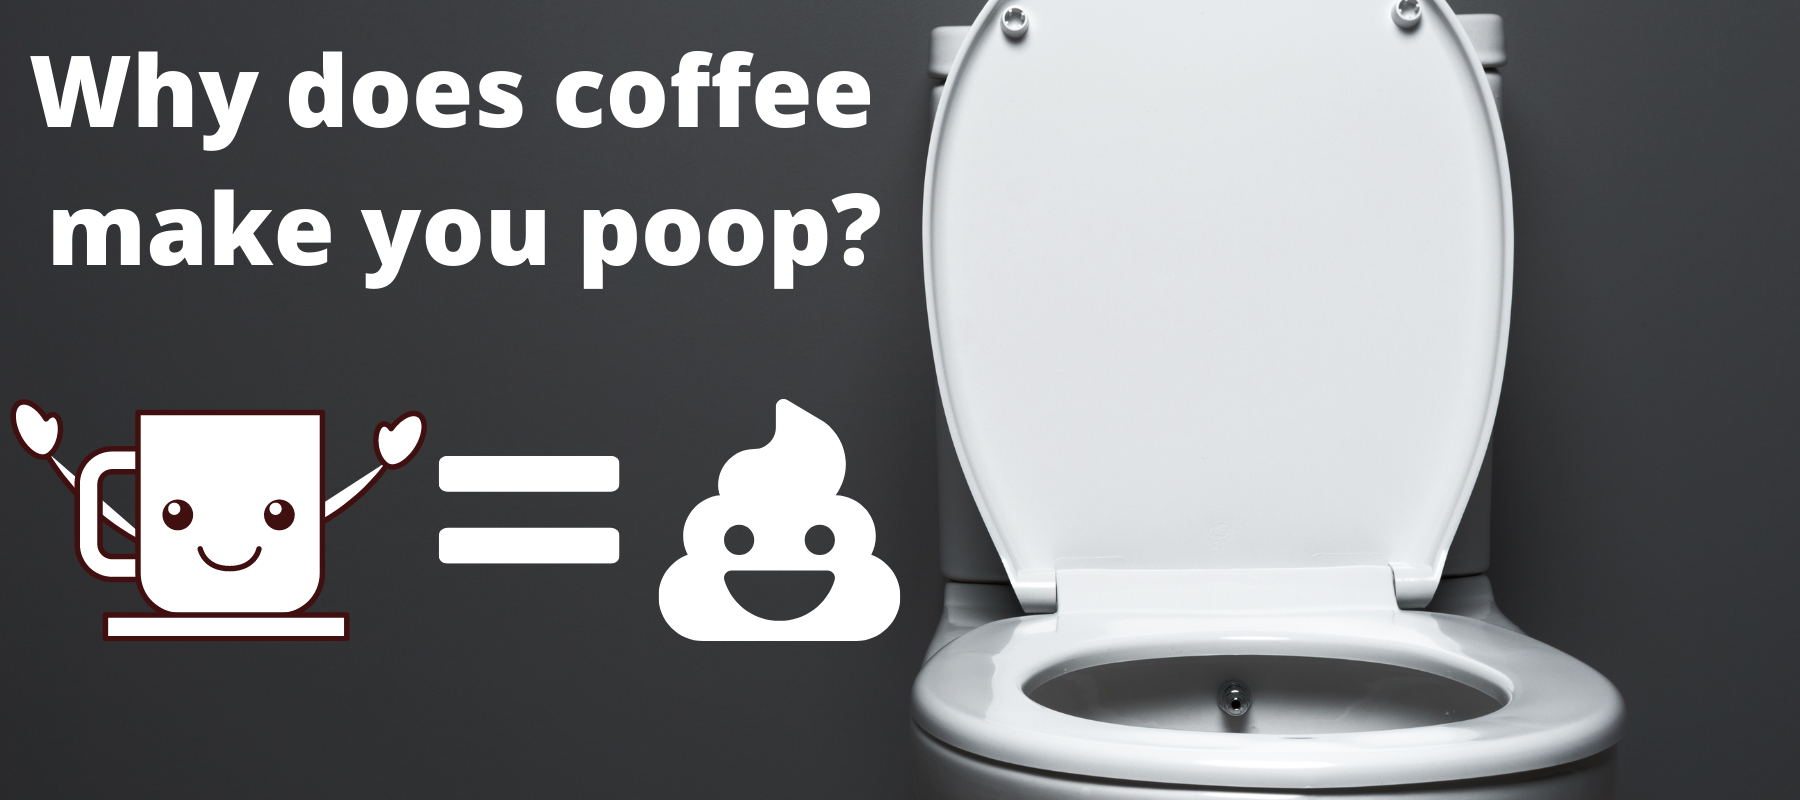 Why does coffee make me poop? Funny toilet graphic.